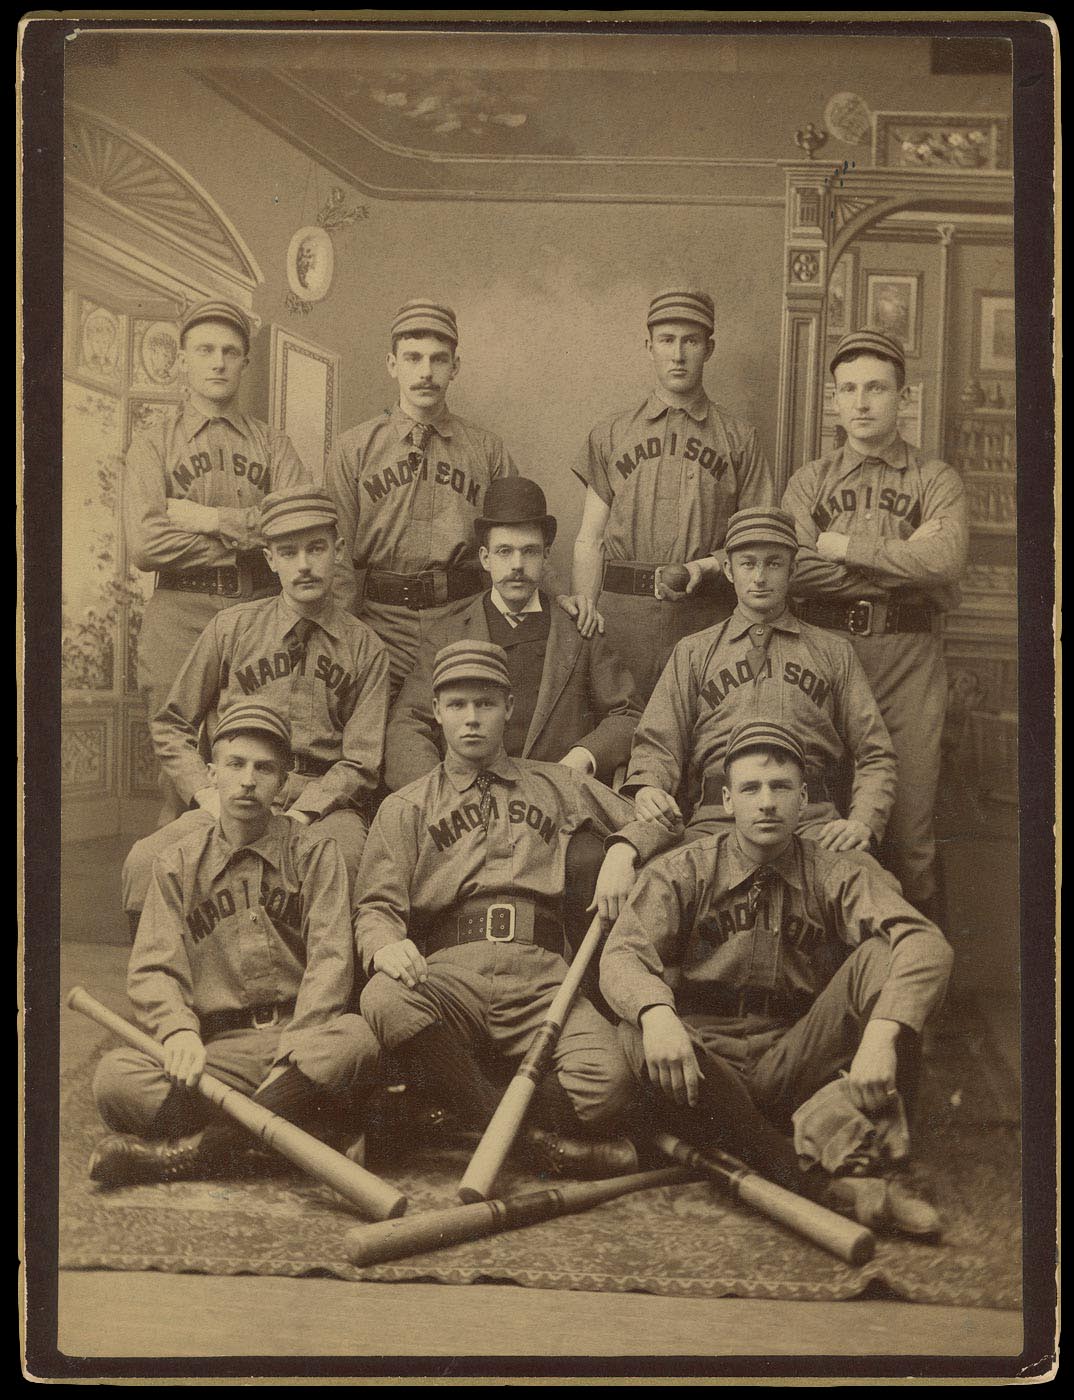 Archival image of students in baseball uniforms